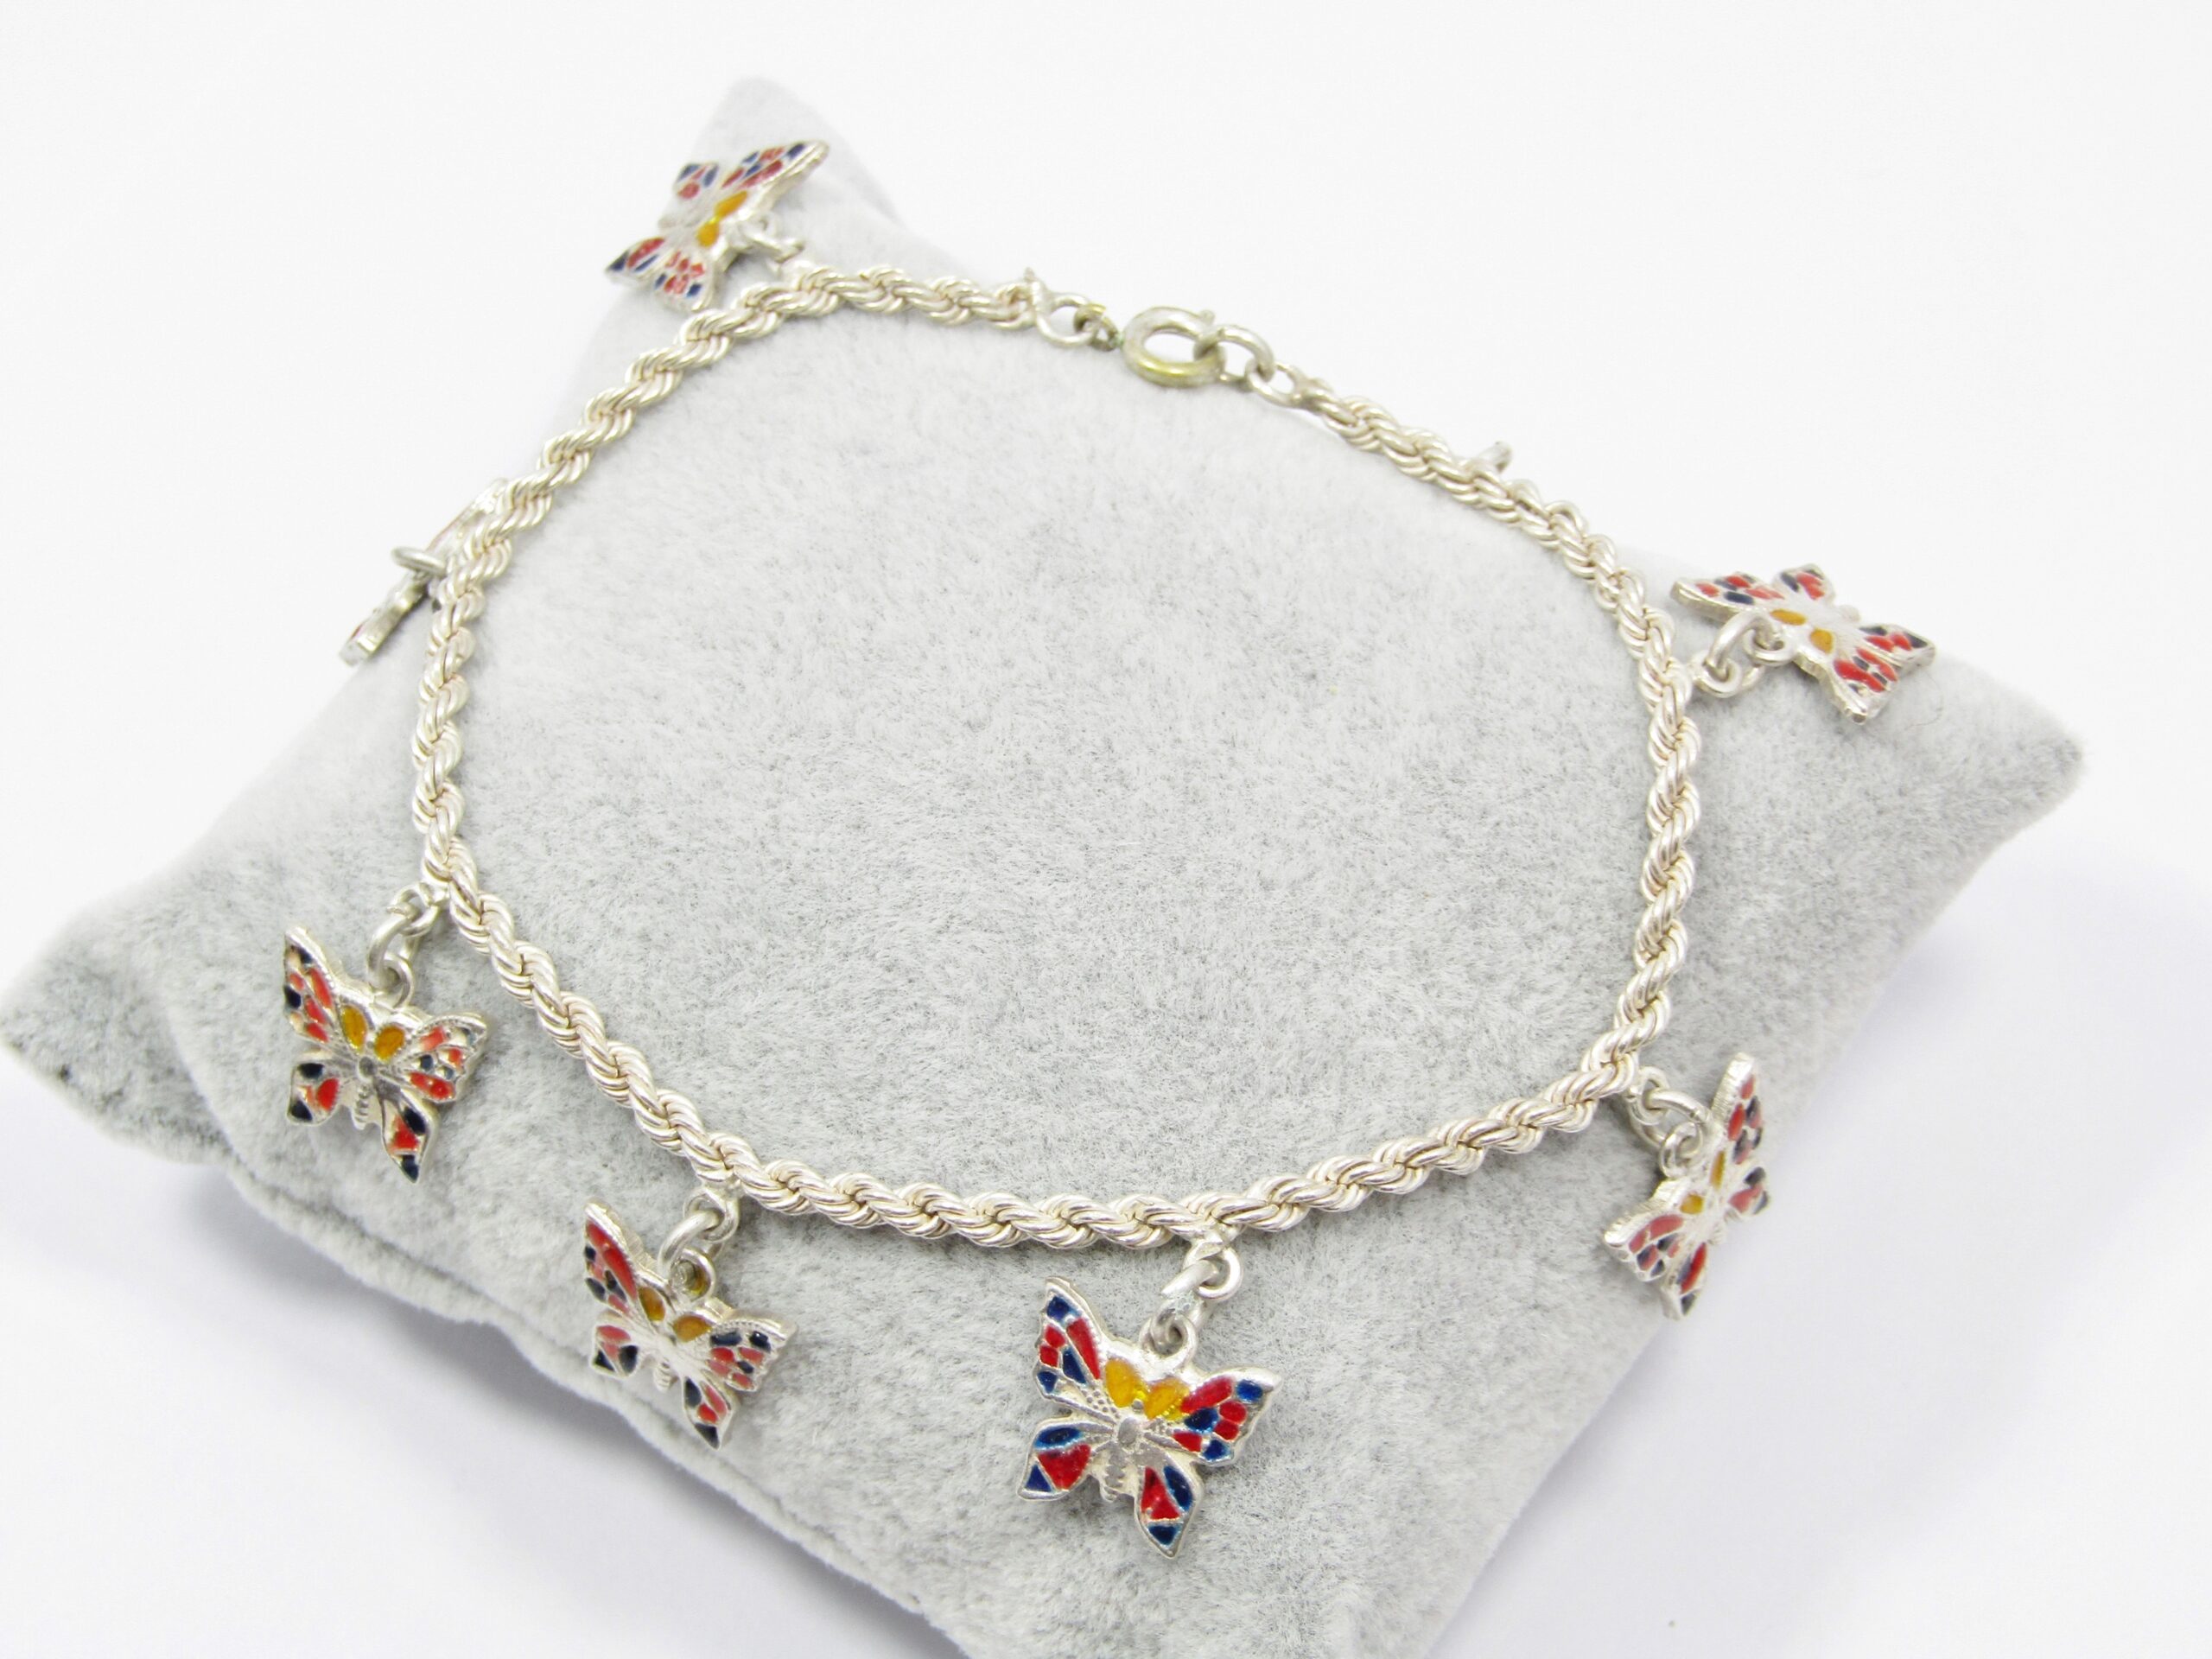 A Beautiful Enamel inlay Butterfly Charm Bracelet With Egyptian Hallmarks for 800 Silver